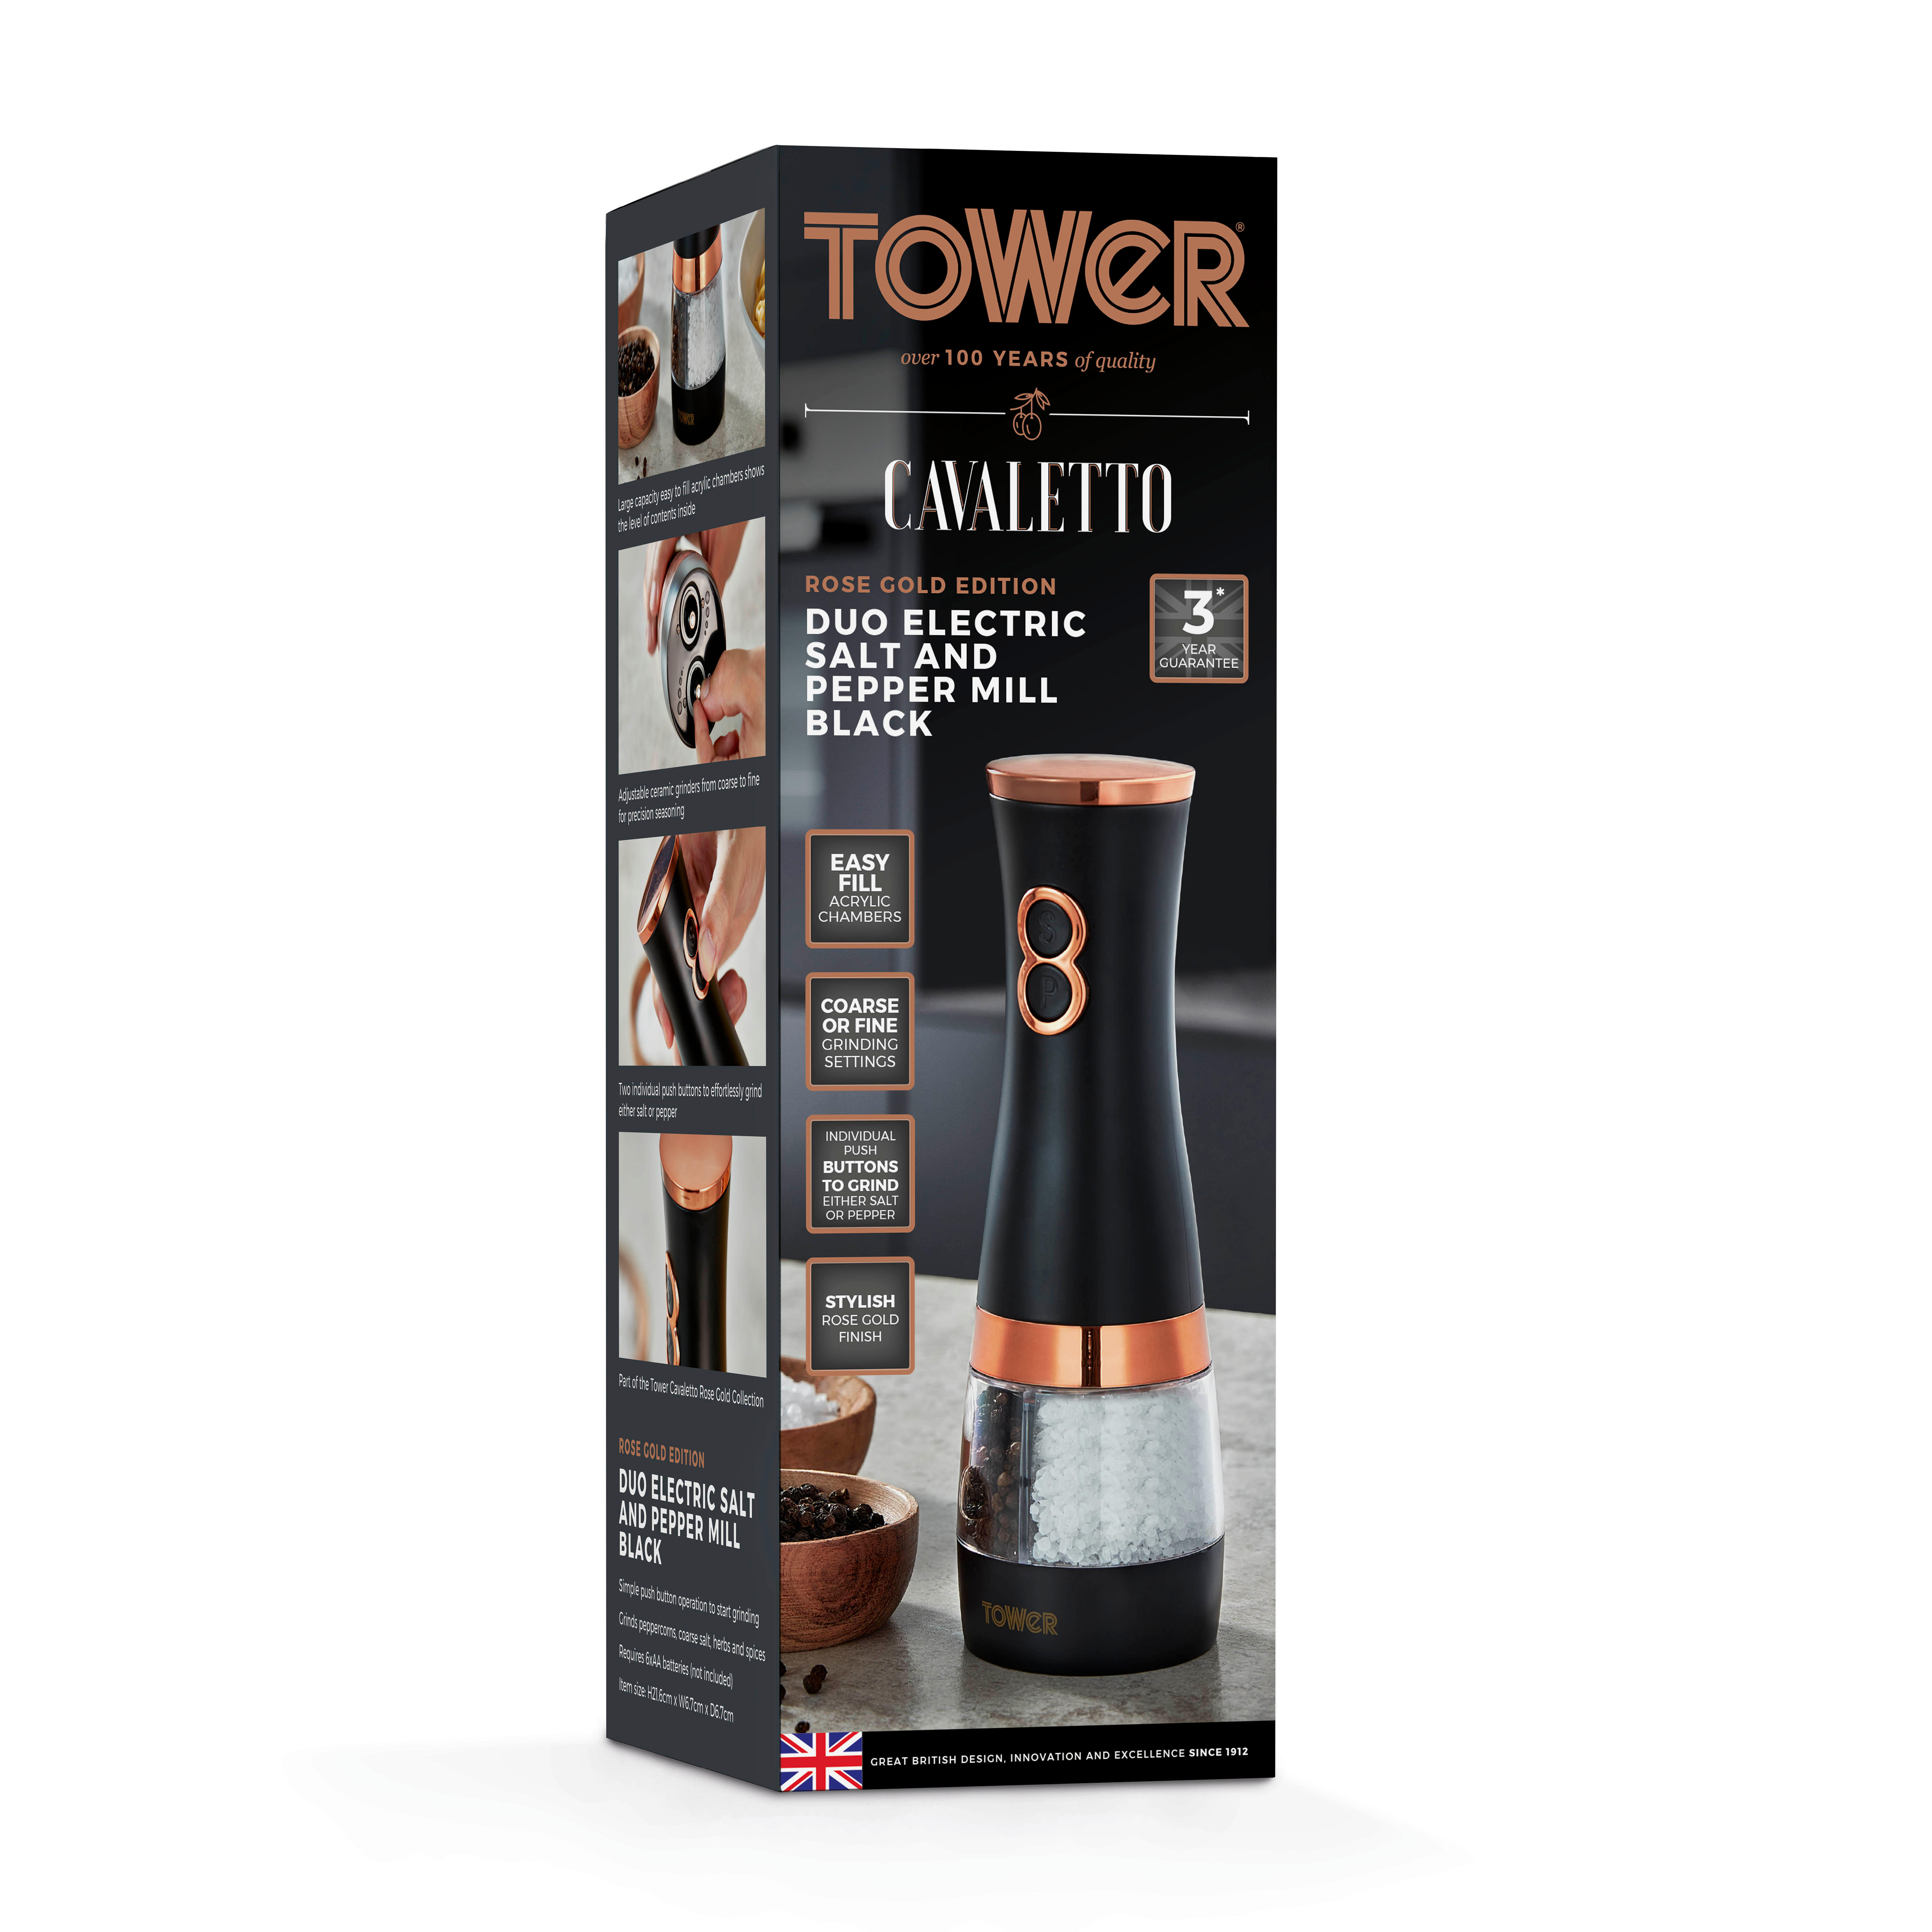 Tower Cavaletto Duo Electric Salt and Pepper Mill Black, Appliances